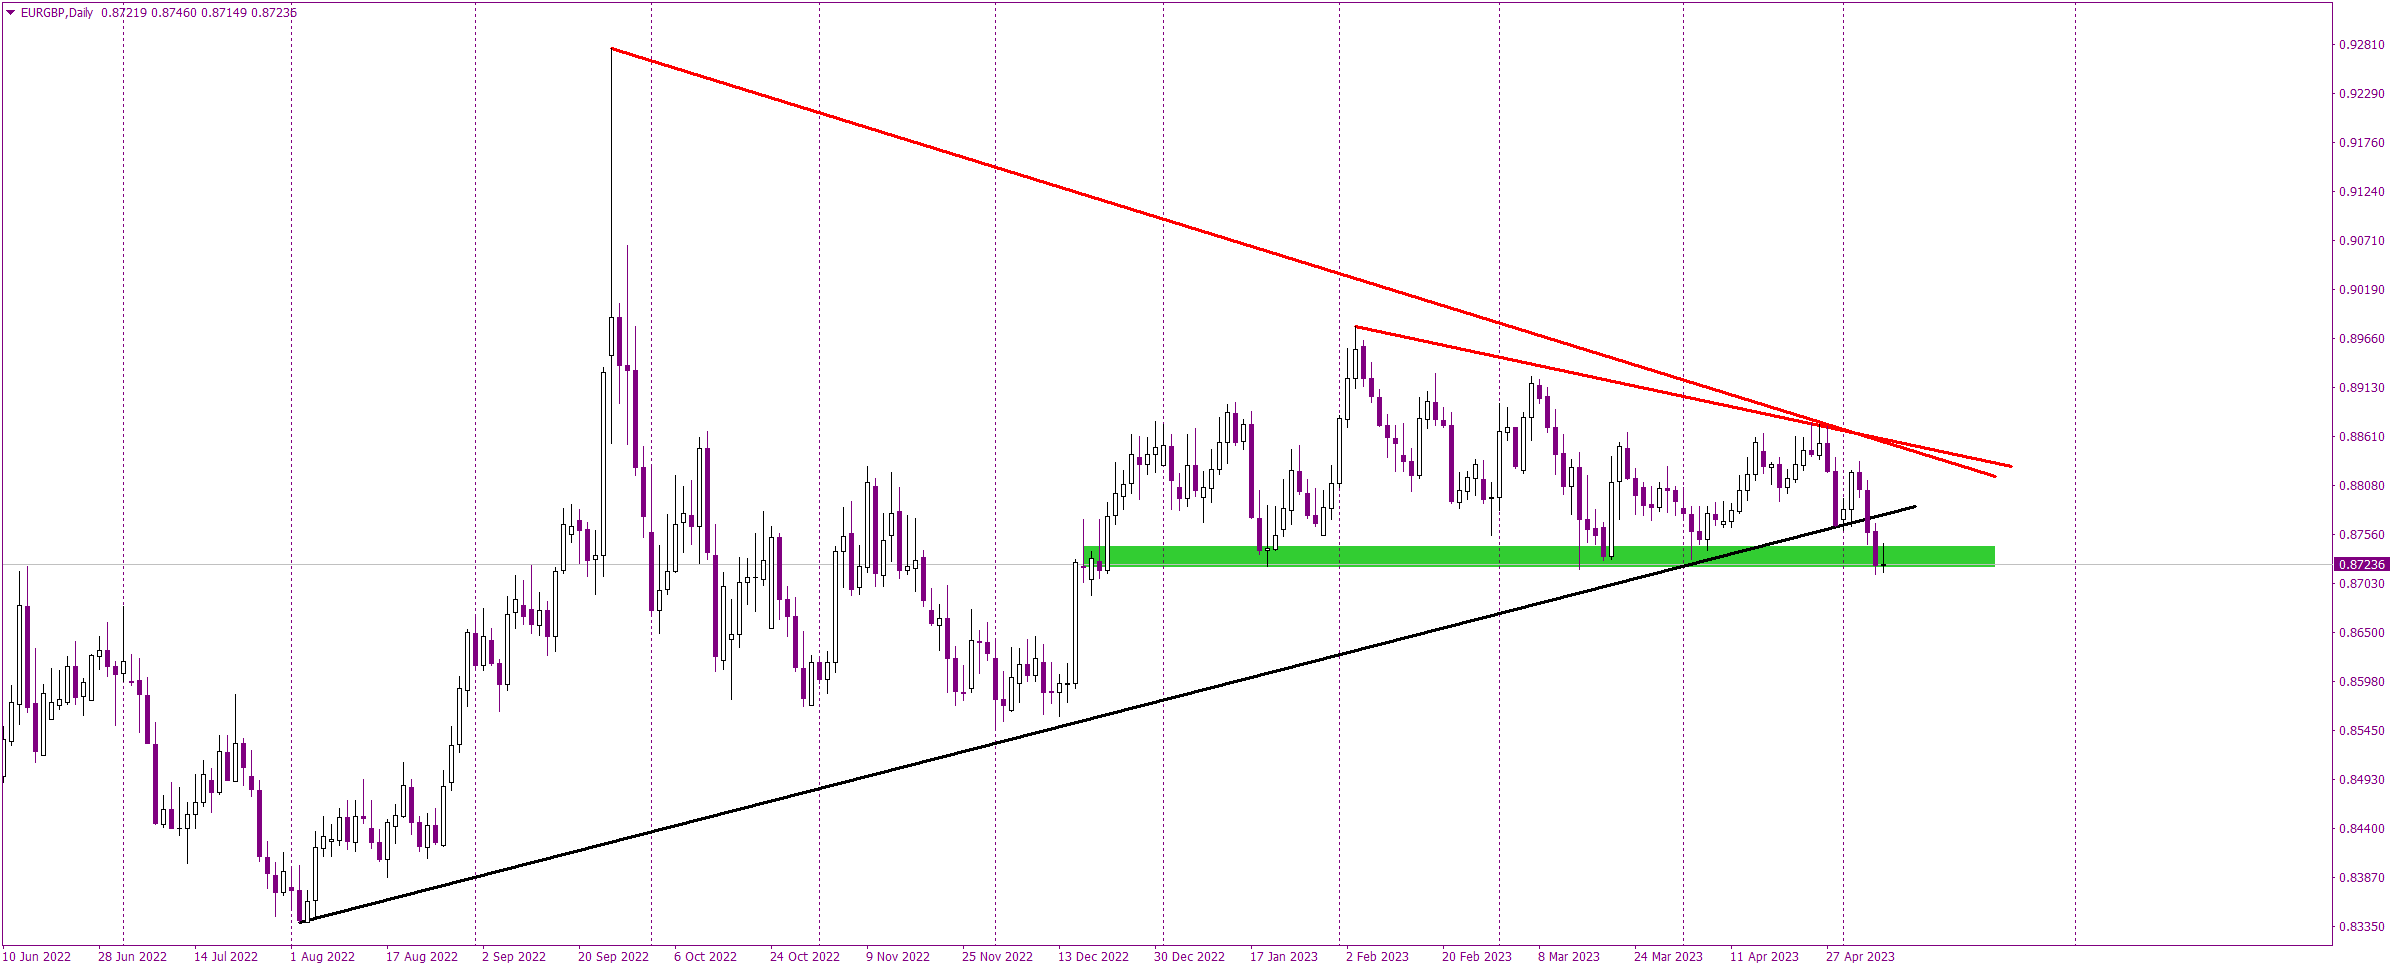 EUR/GBP Analysis: Bearish Sentiment Looms as Price Breaks Key Uptrend Line and Tests Crucial Support